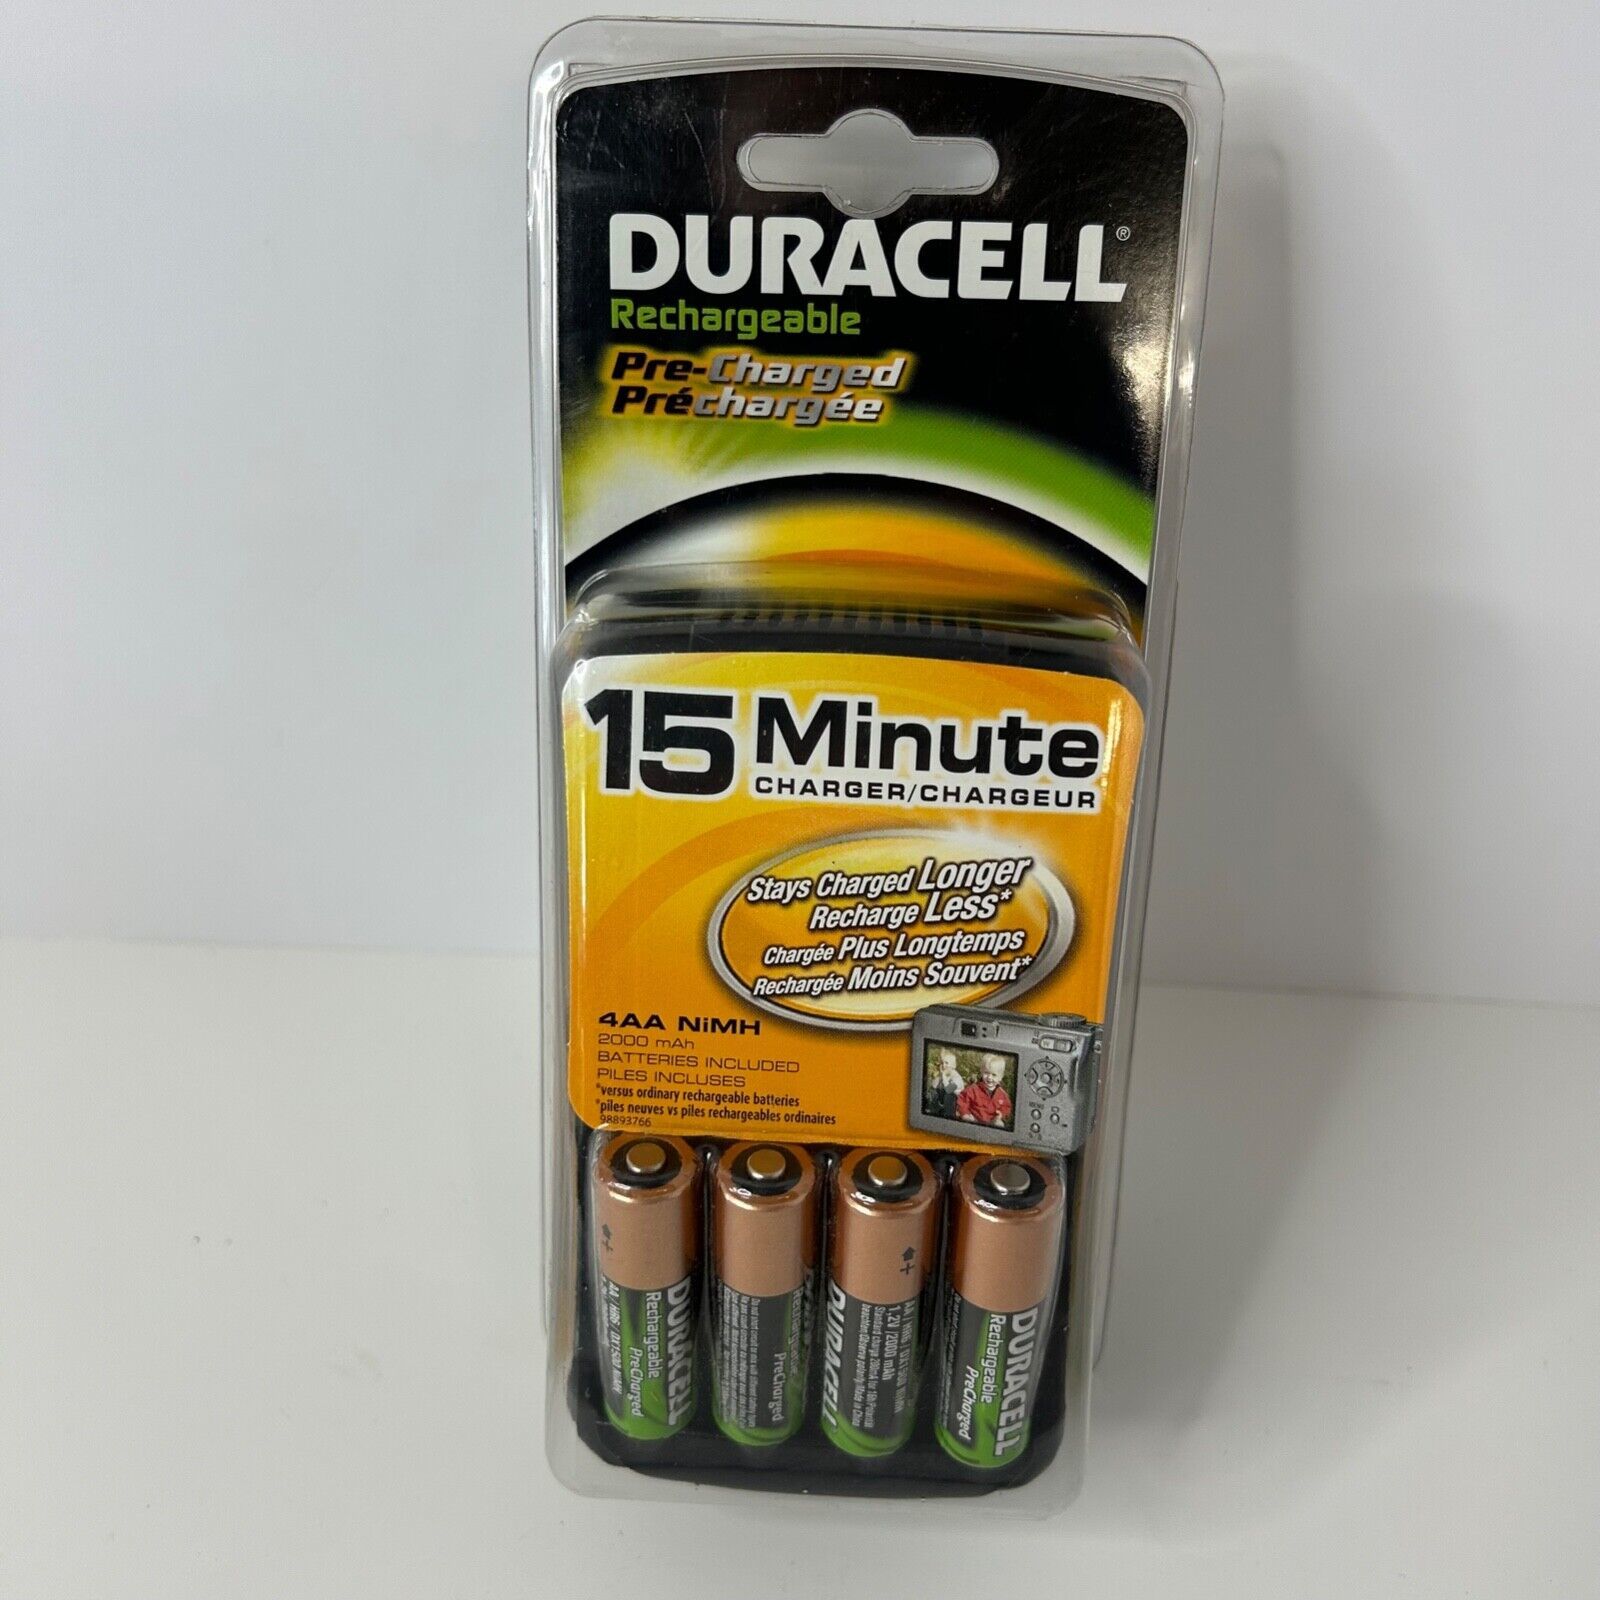 NEW Duracell Rechargeable CEF15DX4N 15 Minute NiMH Battery Charger AA AAA - $37.73